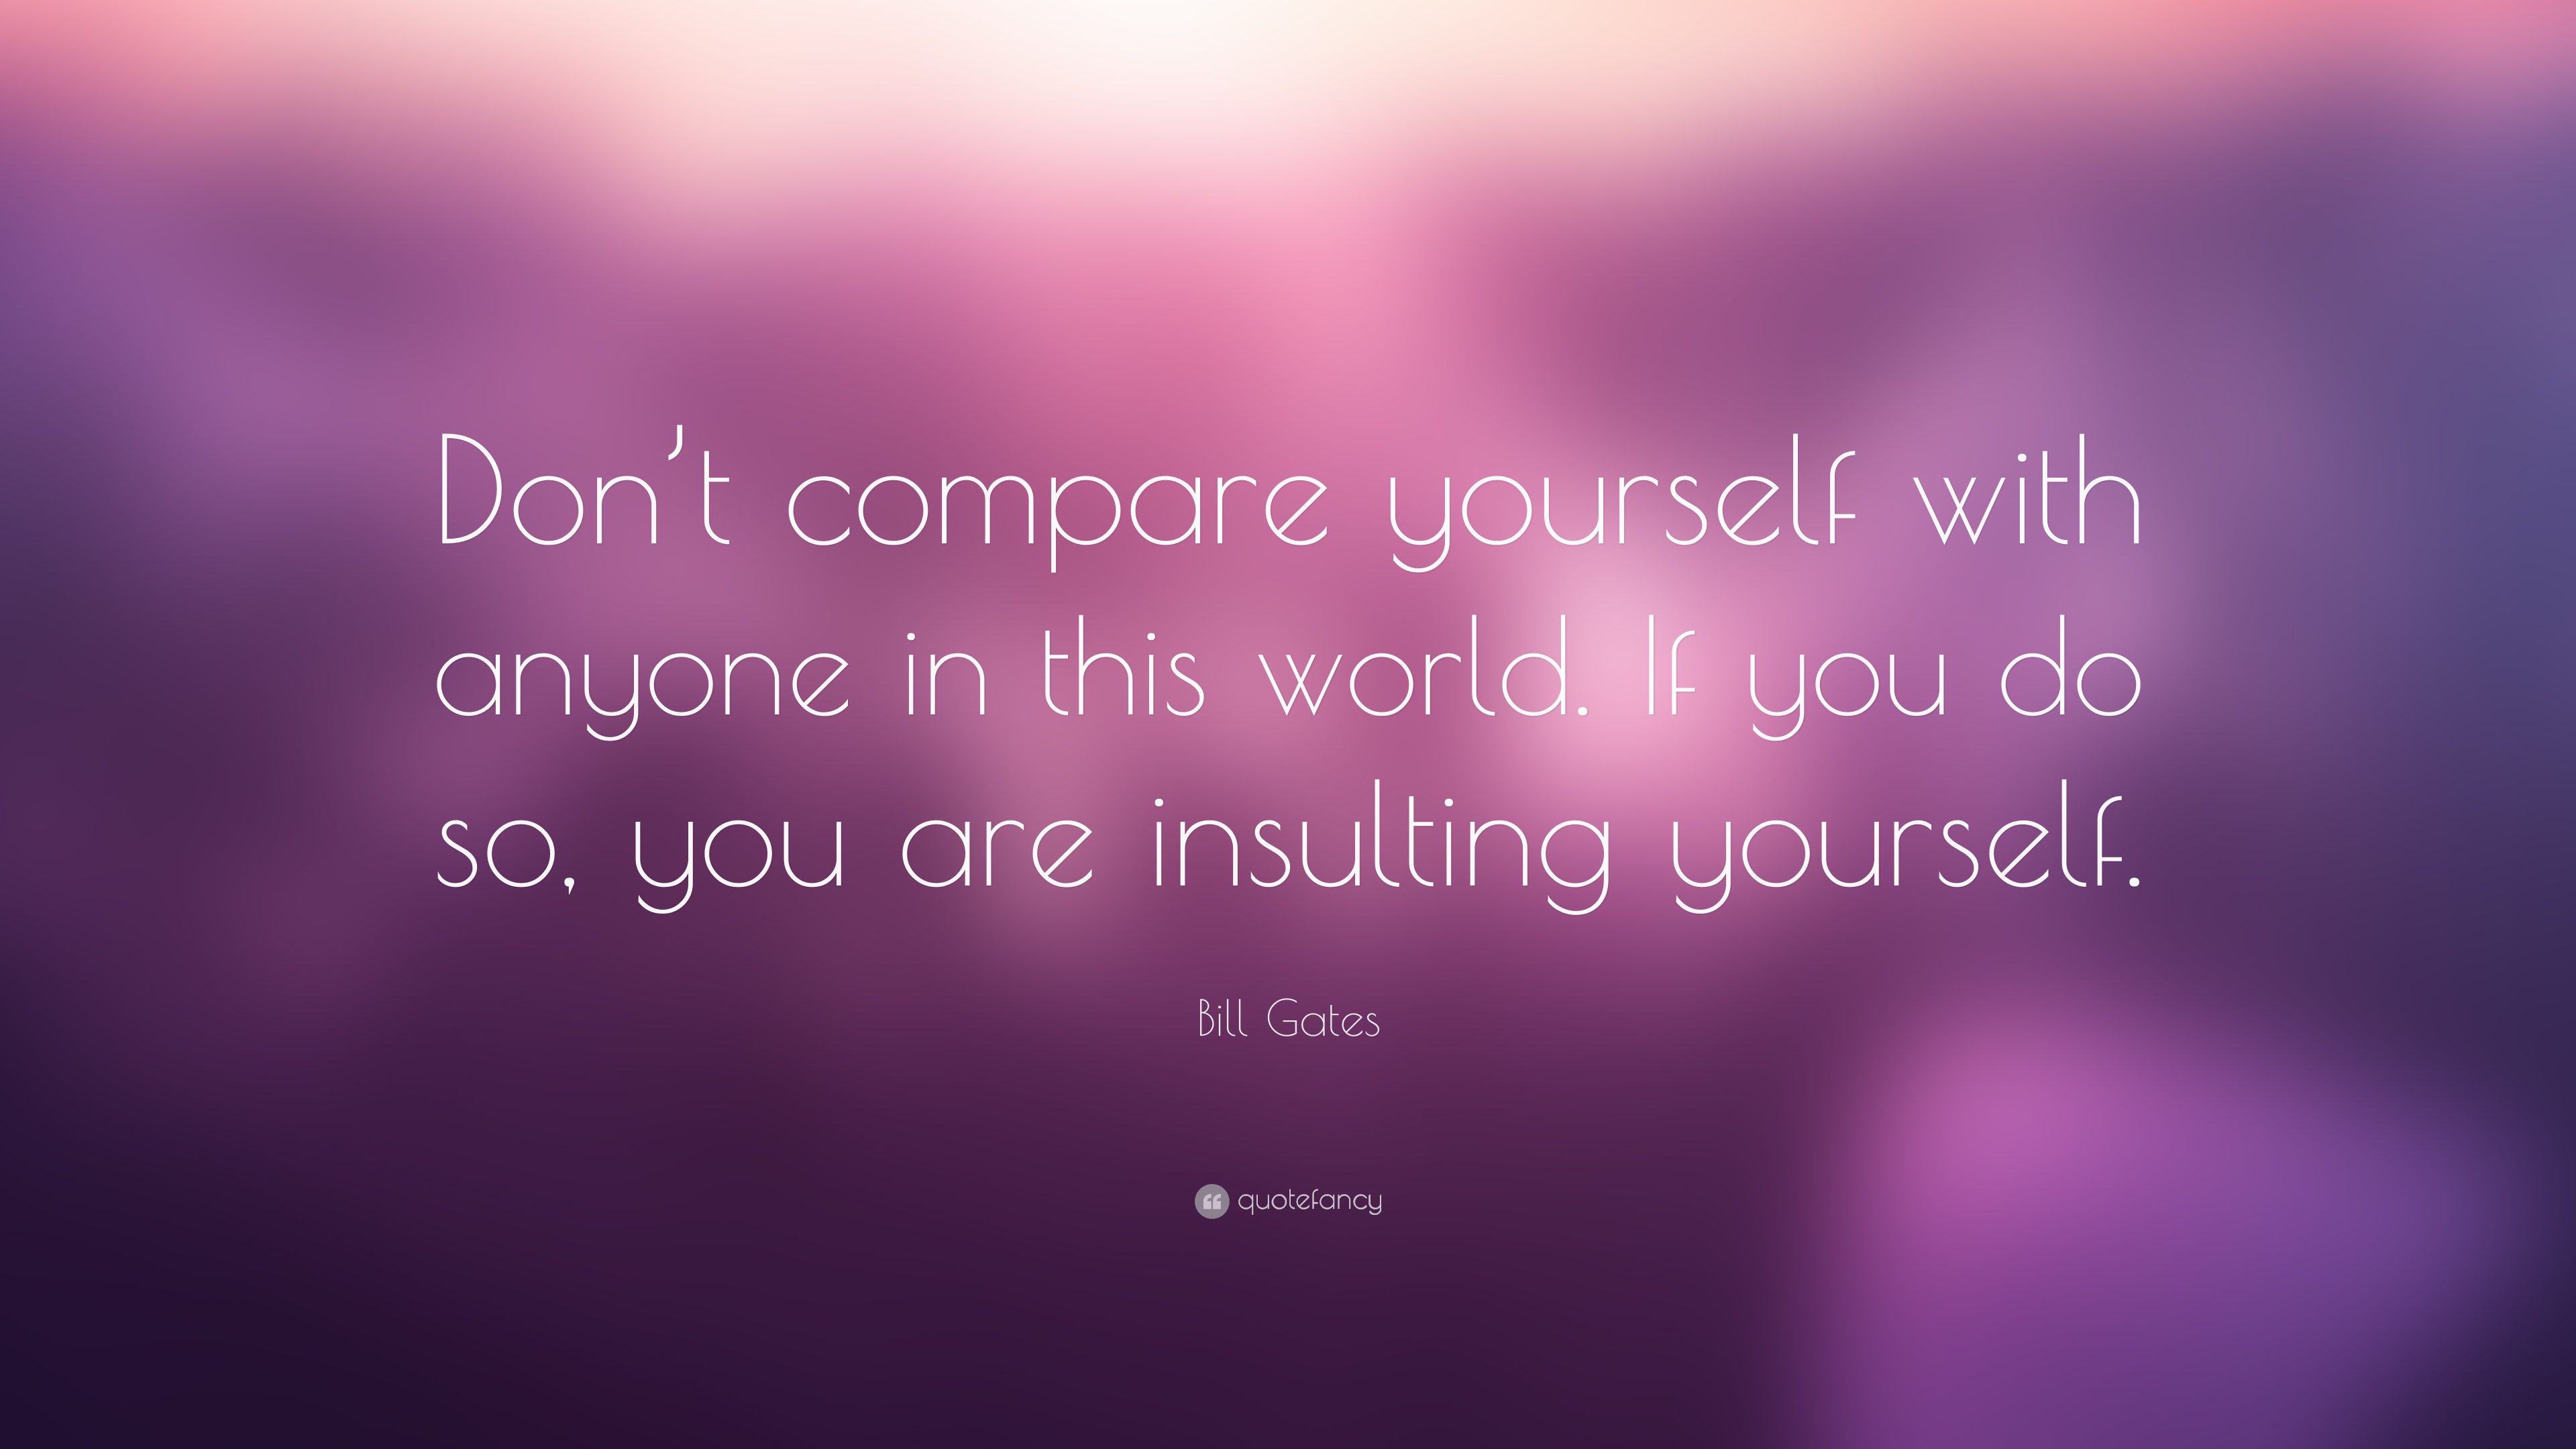 Bill Gates Quote: “Don't compare yourself with anyone in this ...